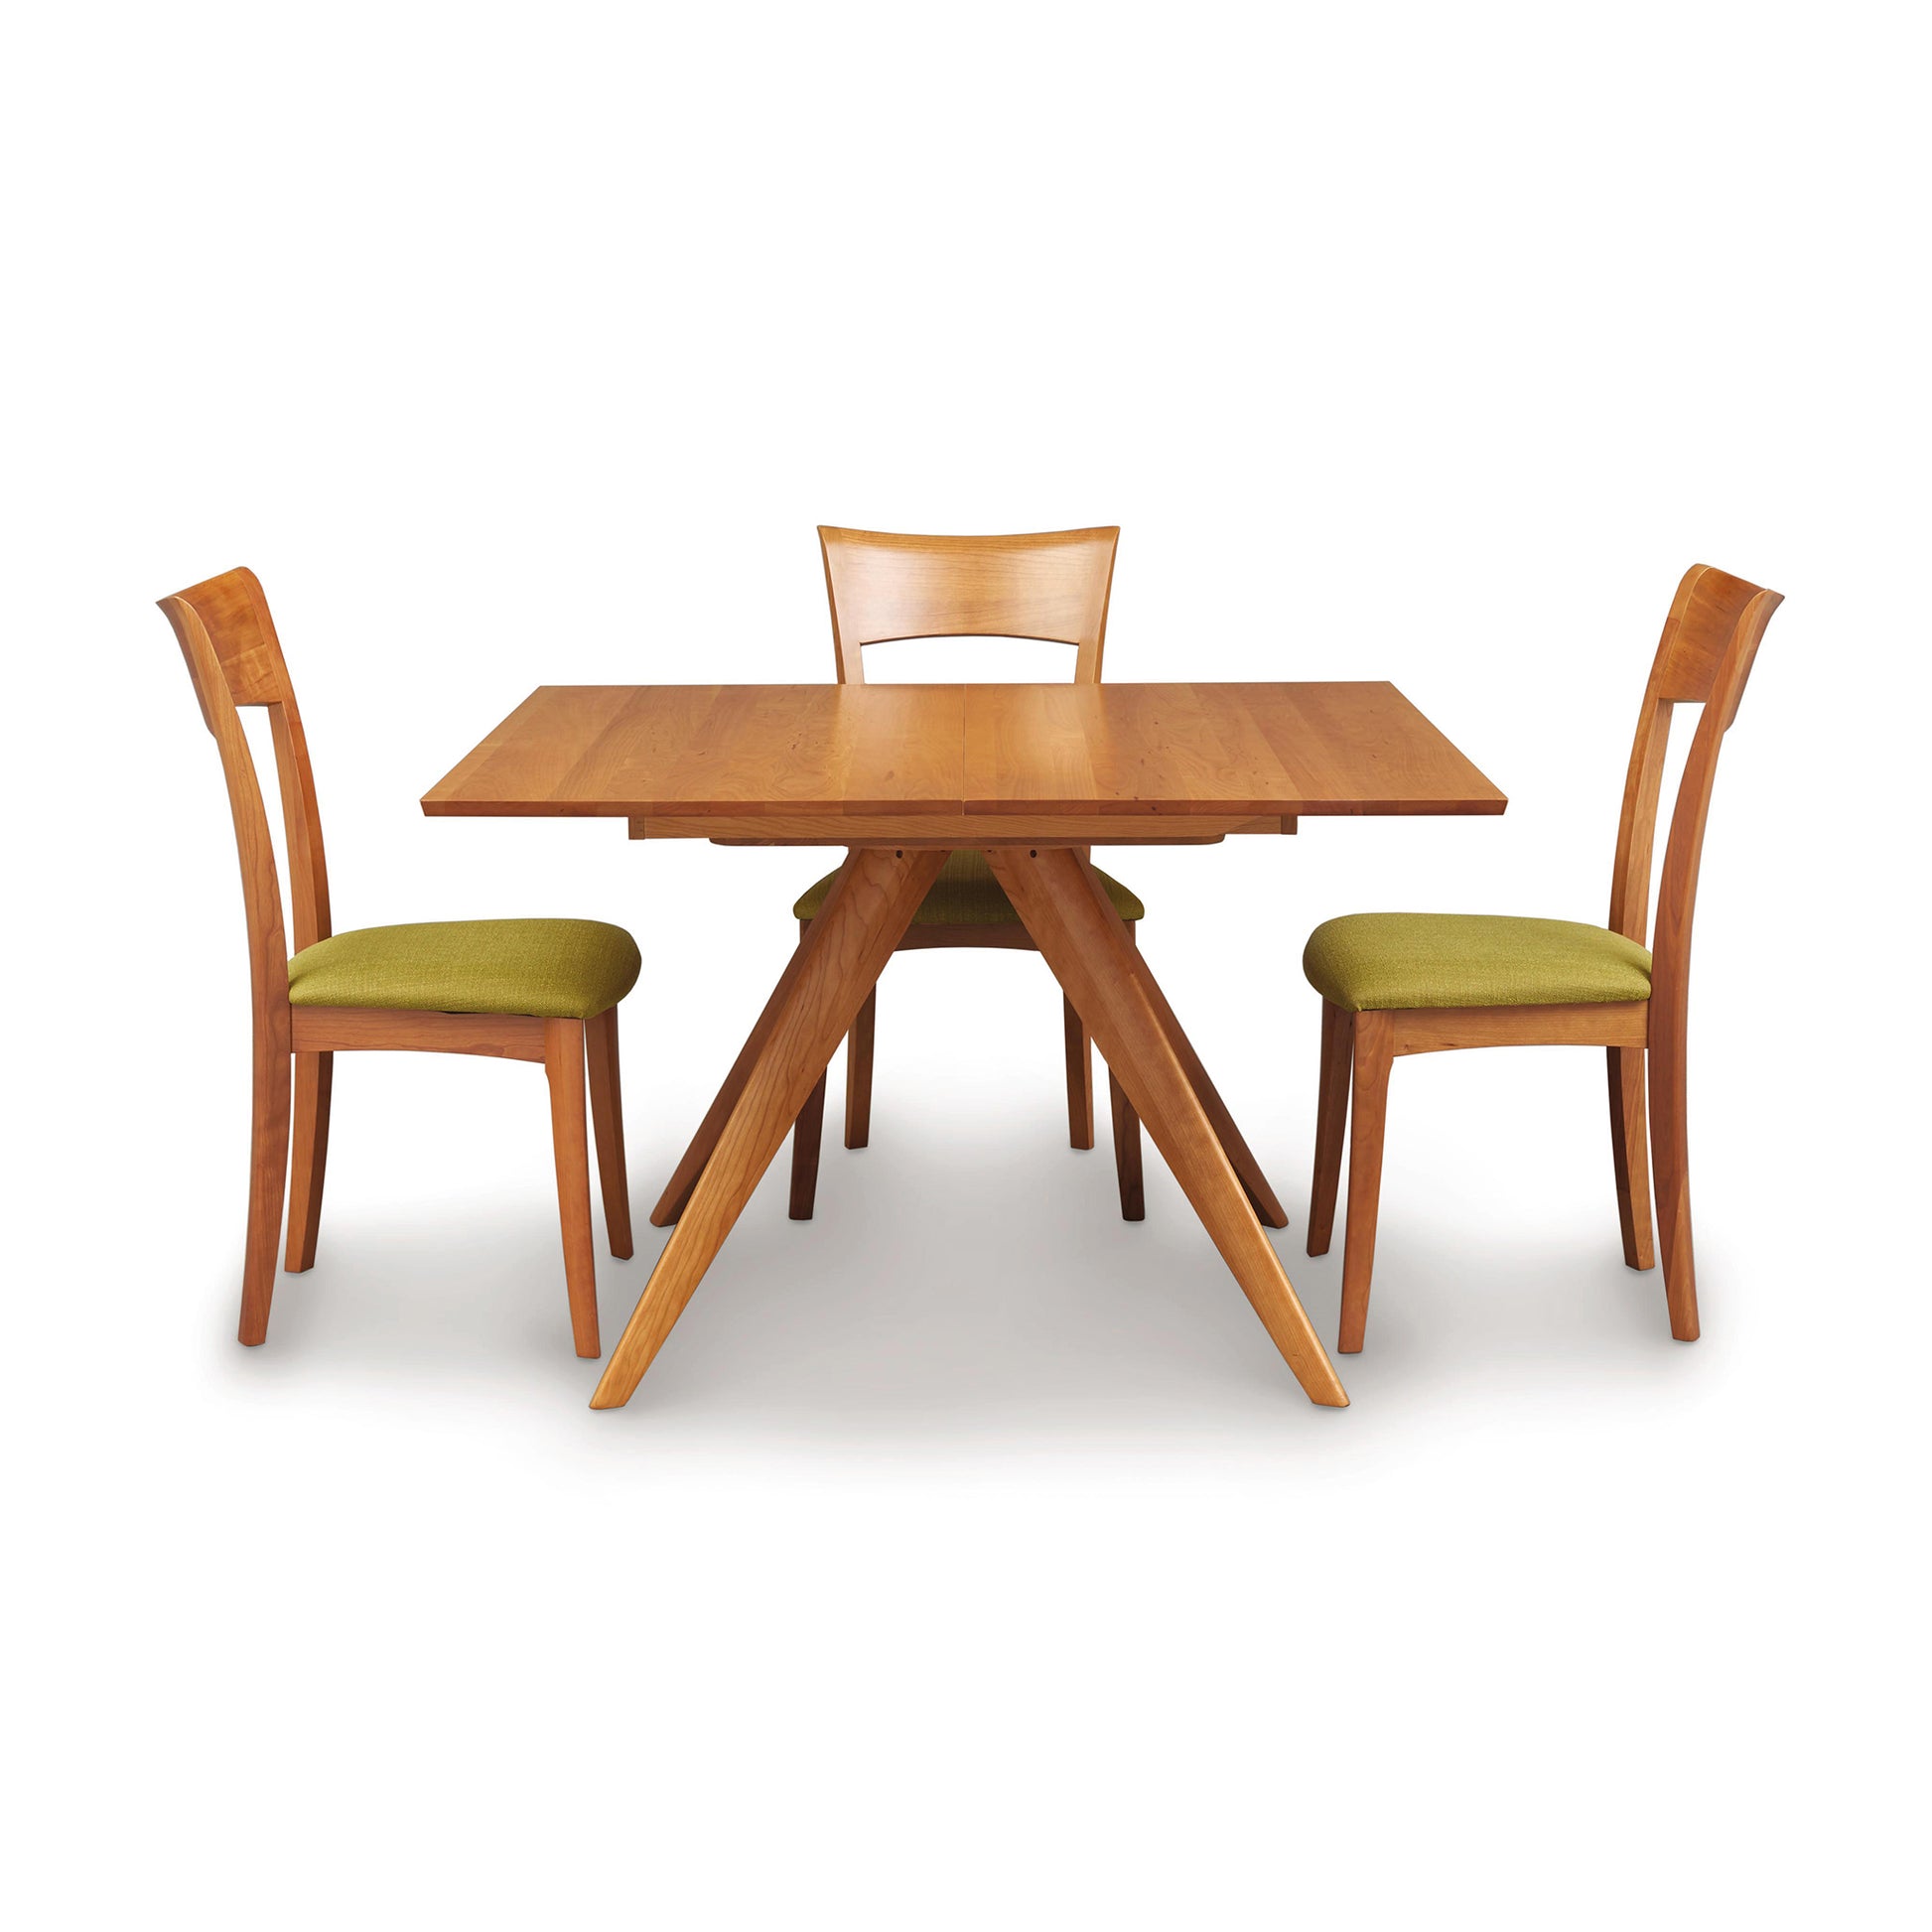 A Copeland Furniture Catalina Square Extension Dining Table with two matching chairs set against a white background. The chairs have green upholstered seats made of sustainably harvested wood.